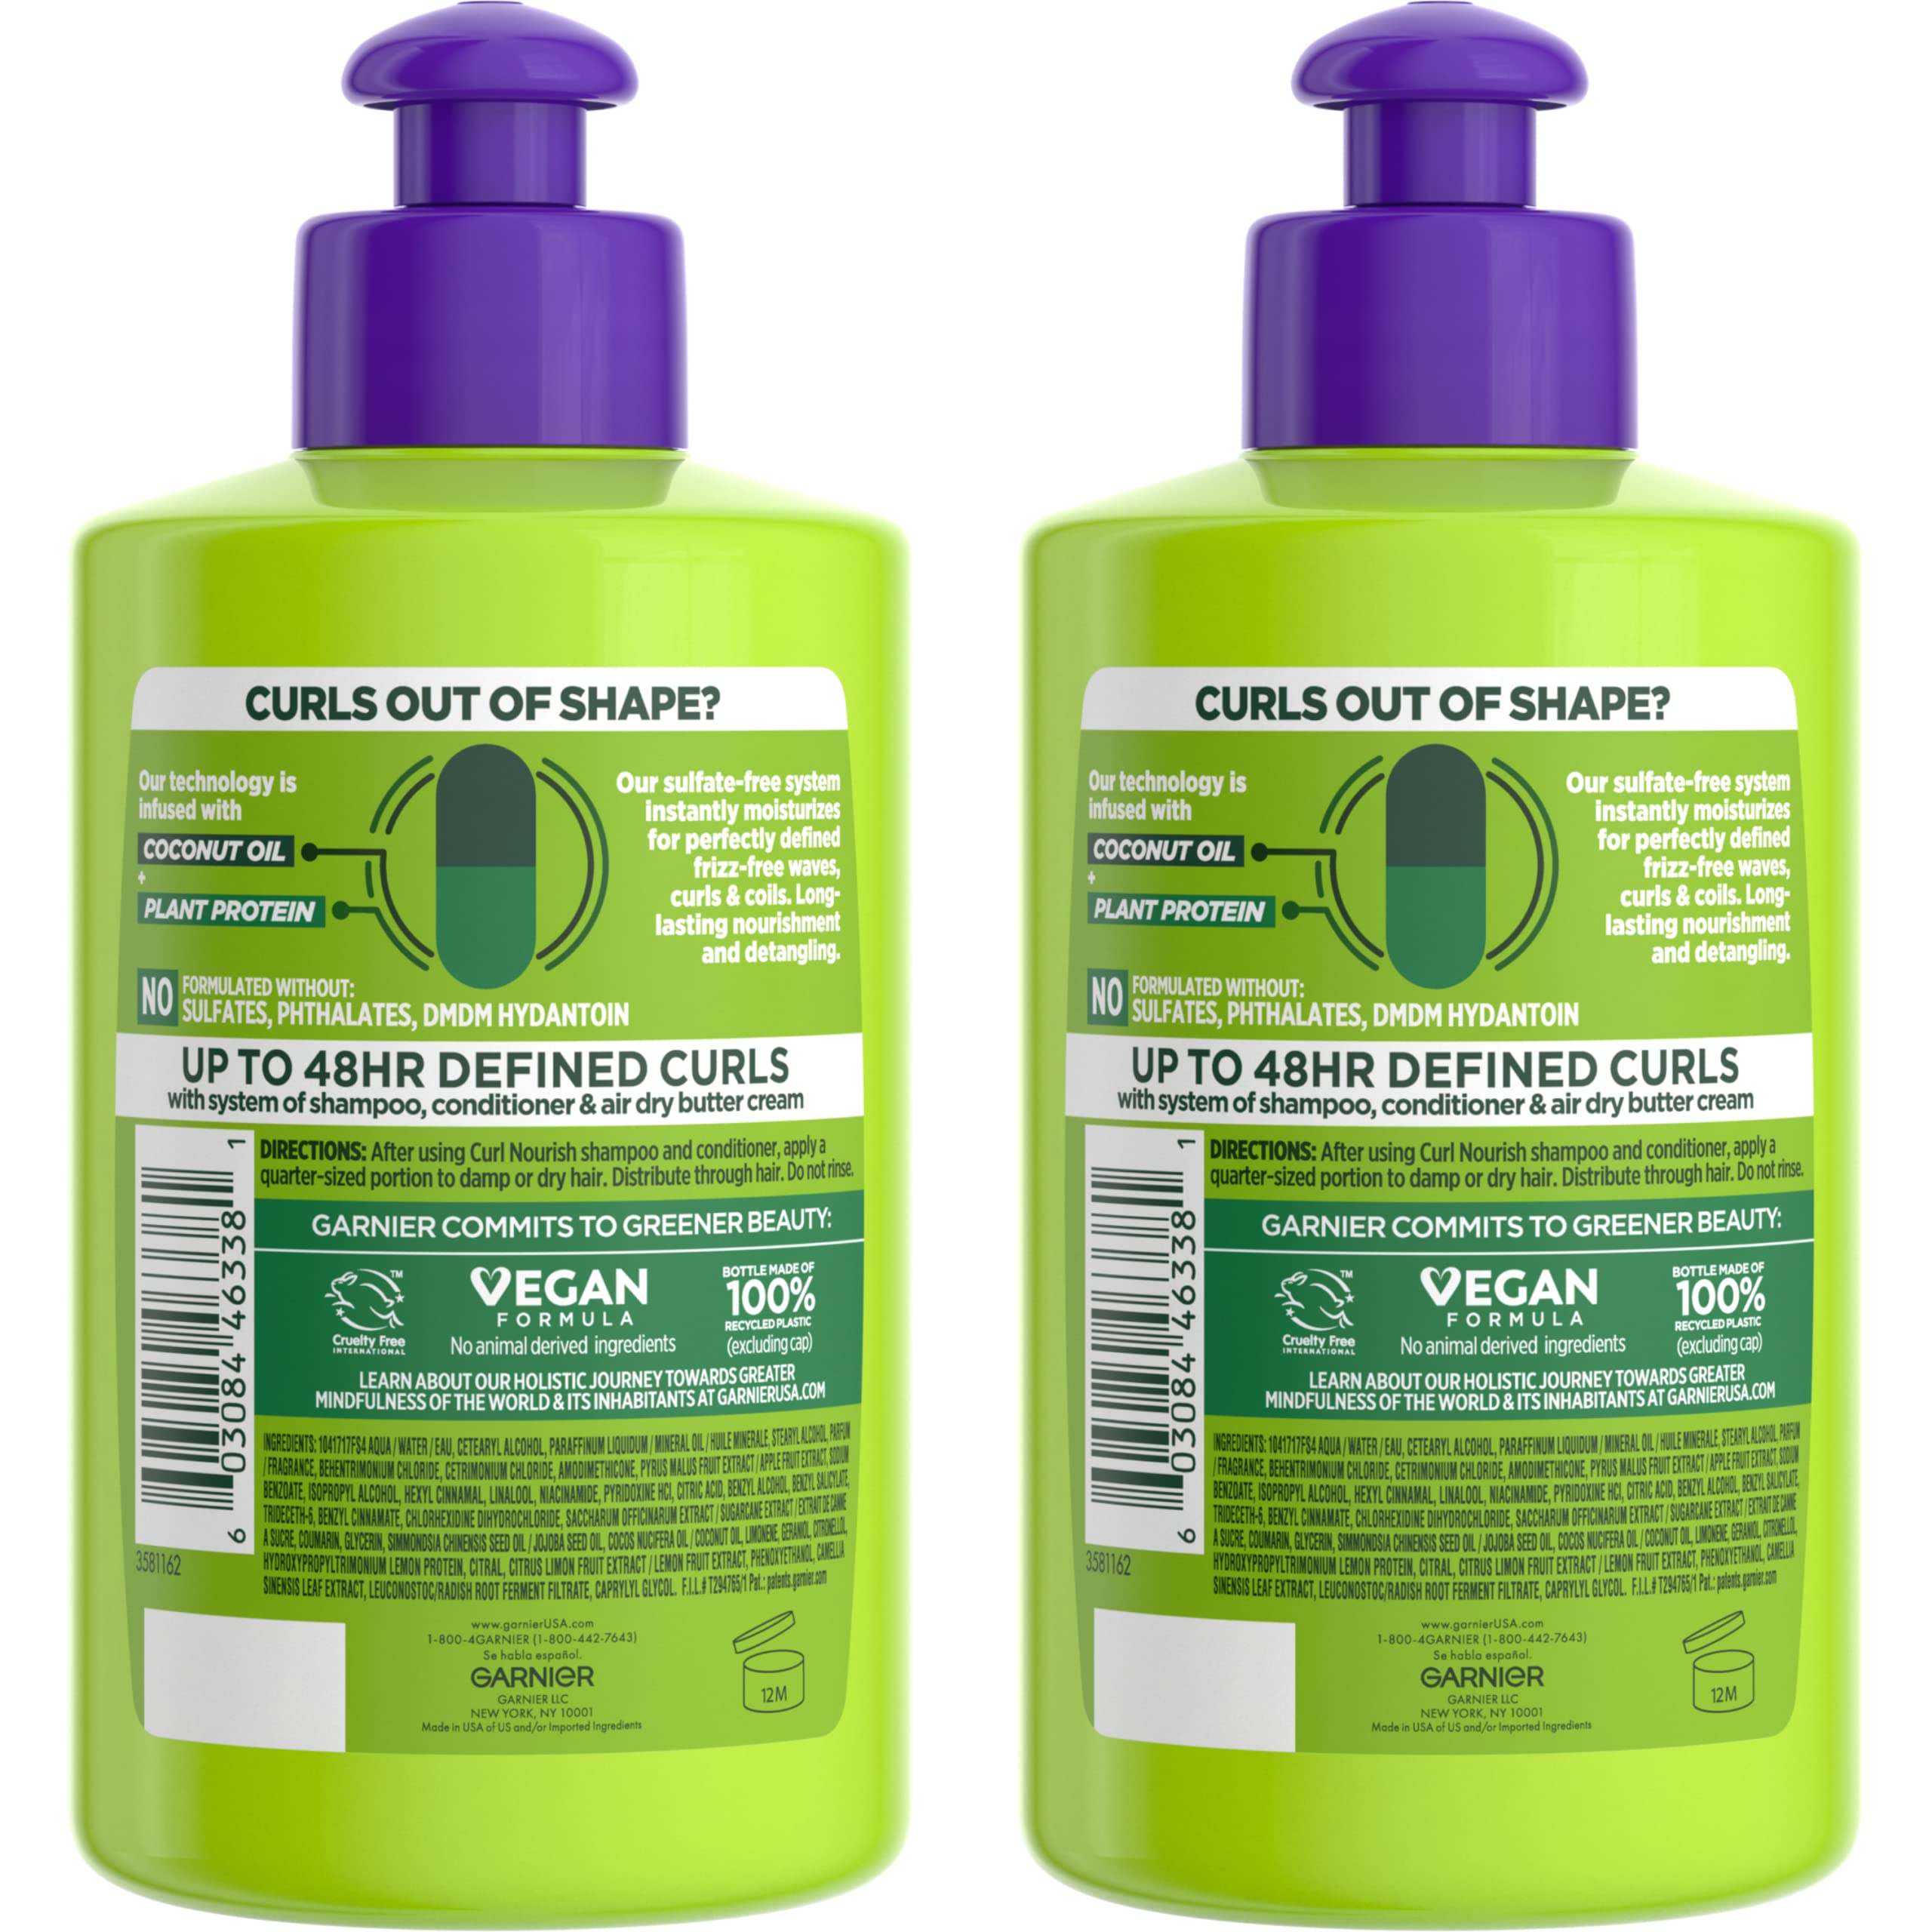 Garnier Hair Care Fructis Triple Nutrition Curl Nourish Butter Cream Leave-In Conditioner, 10.2 Fl Oz, Pack of 2